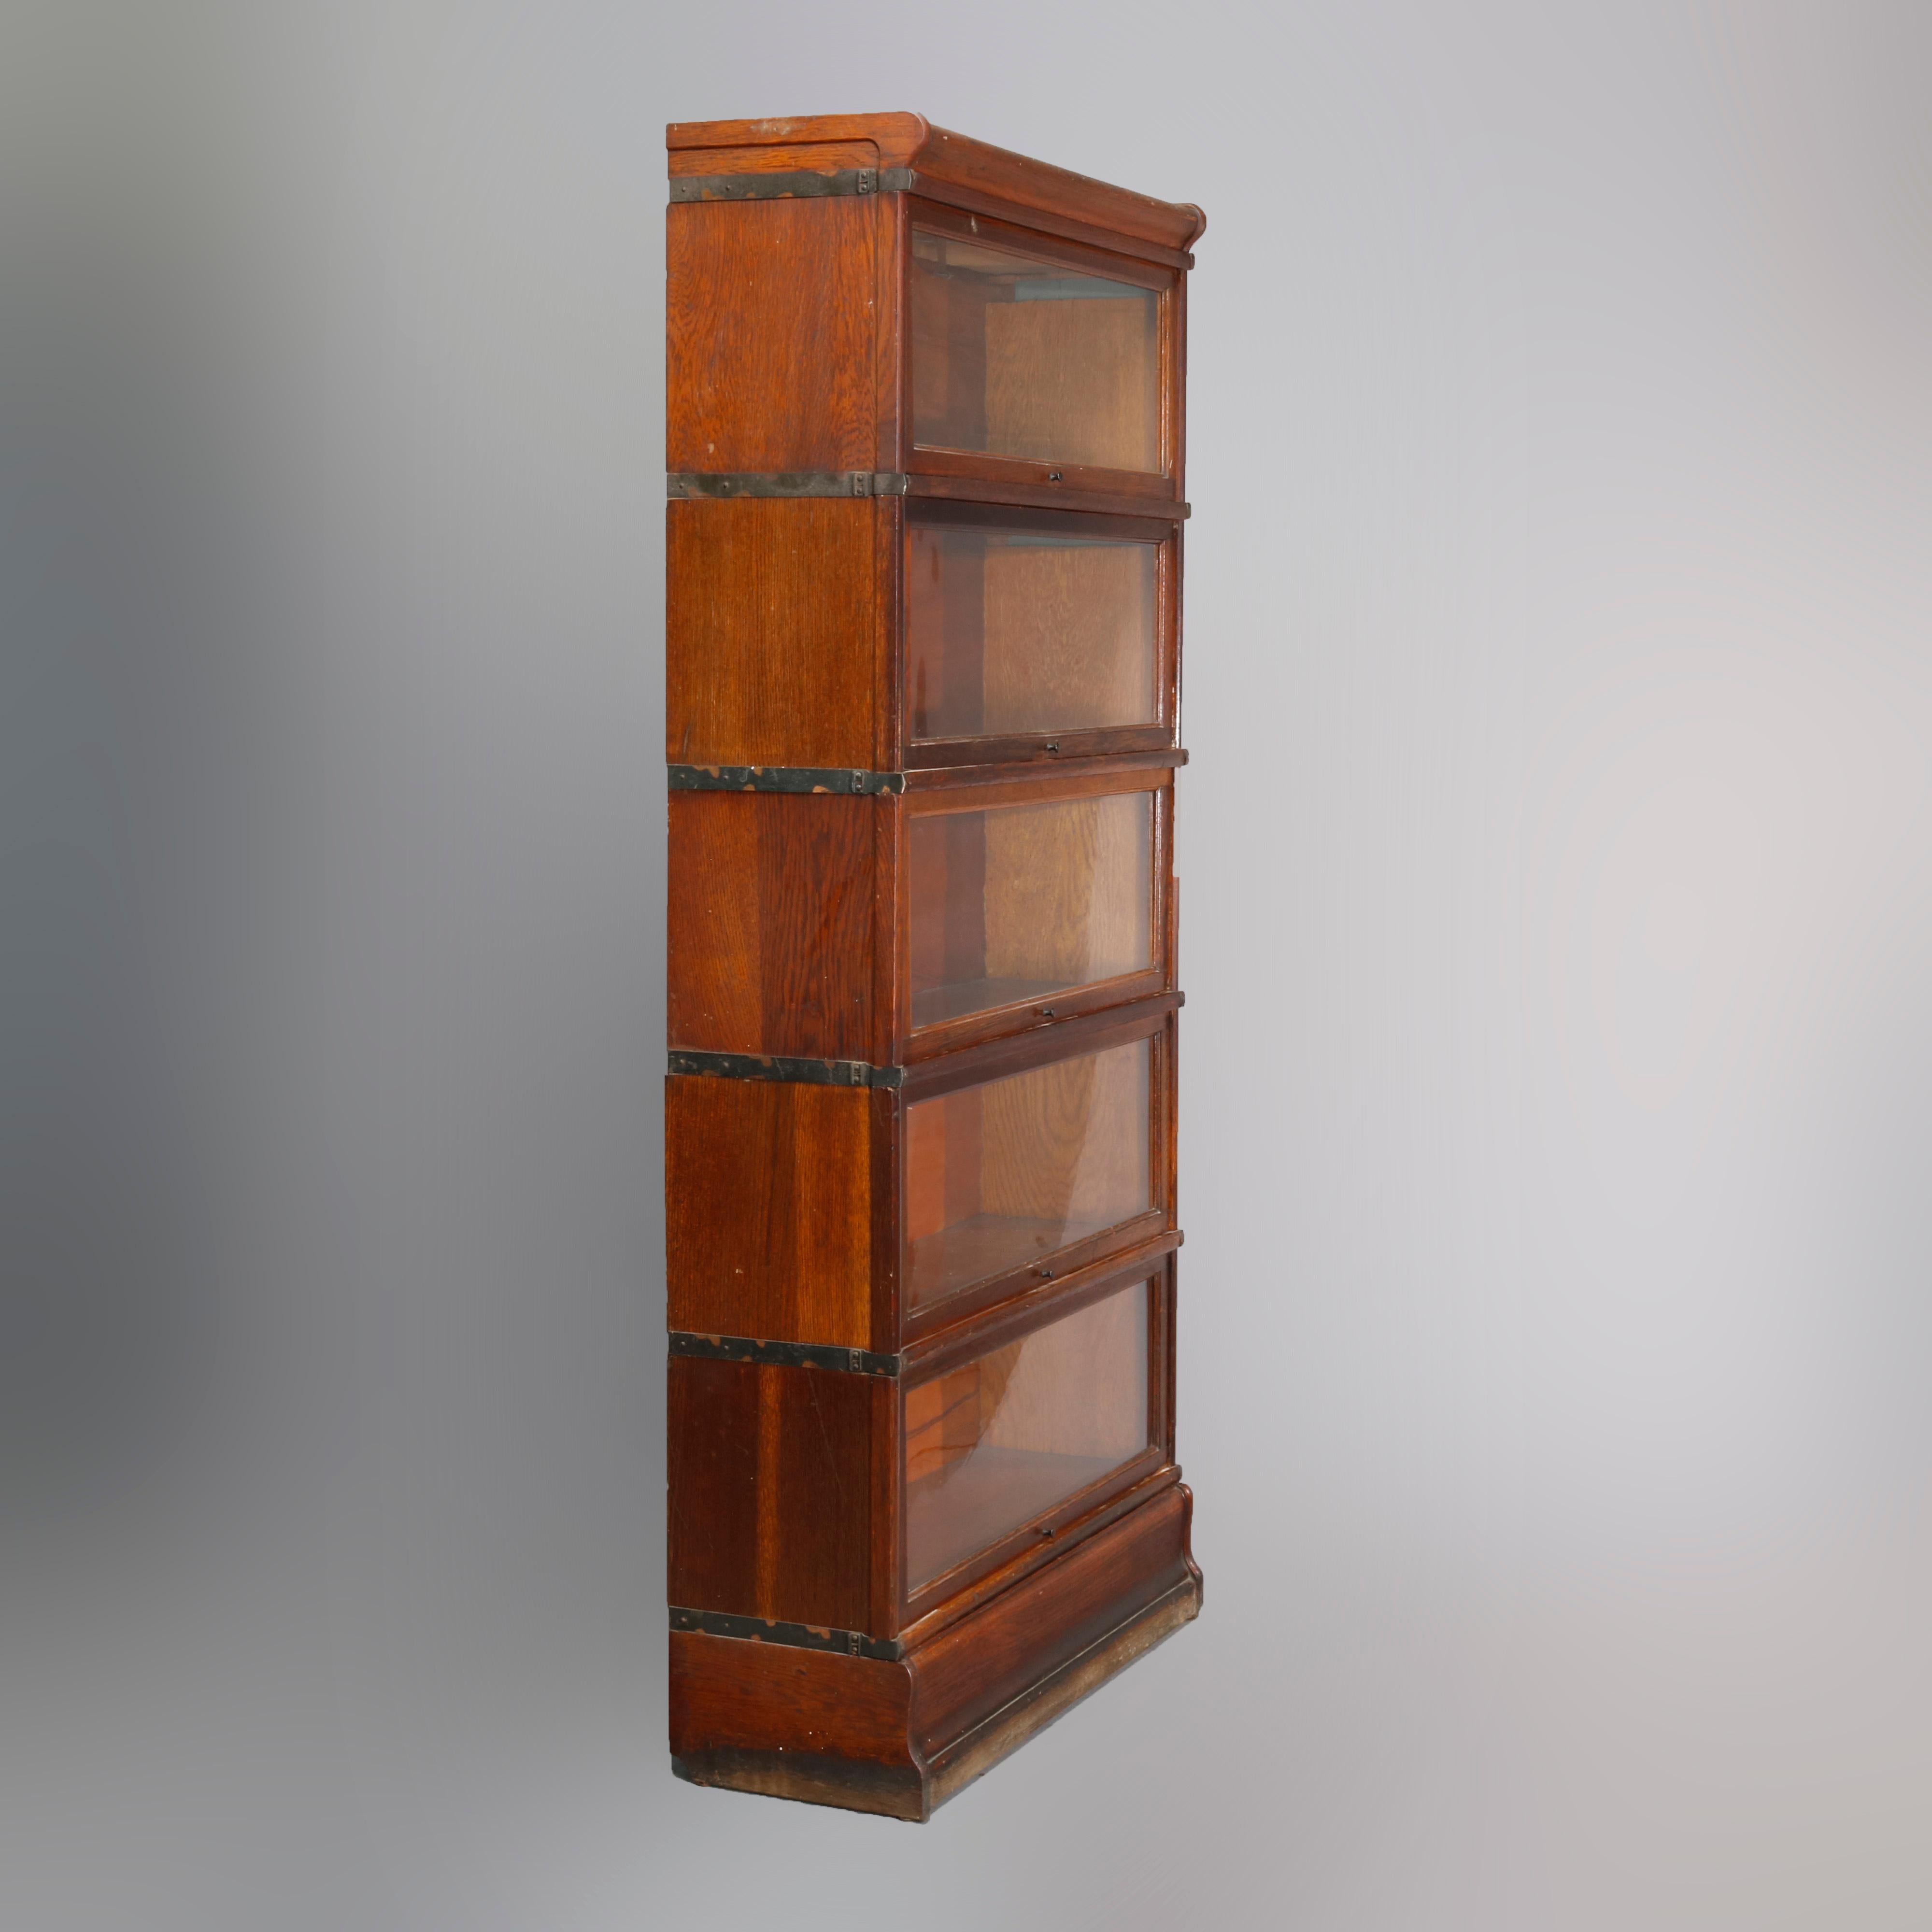 An Arts & Crafts sectional barrister bookcase by Globe-Wernicke offers quarter sawn oak construction with five stacks each having a pull-down glass door, raised on shaped base and surmounted by removable crown, original labels as photographed, circa